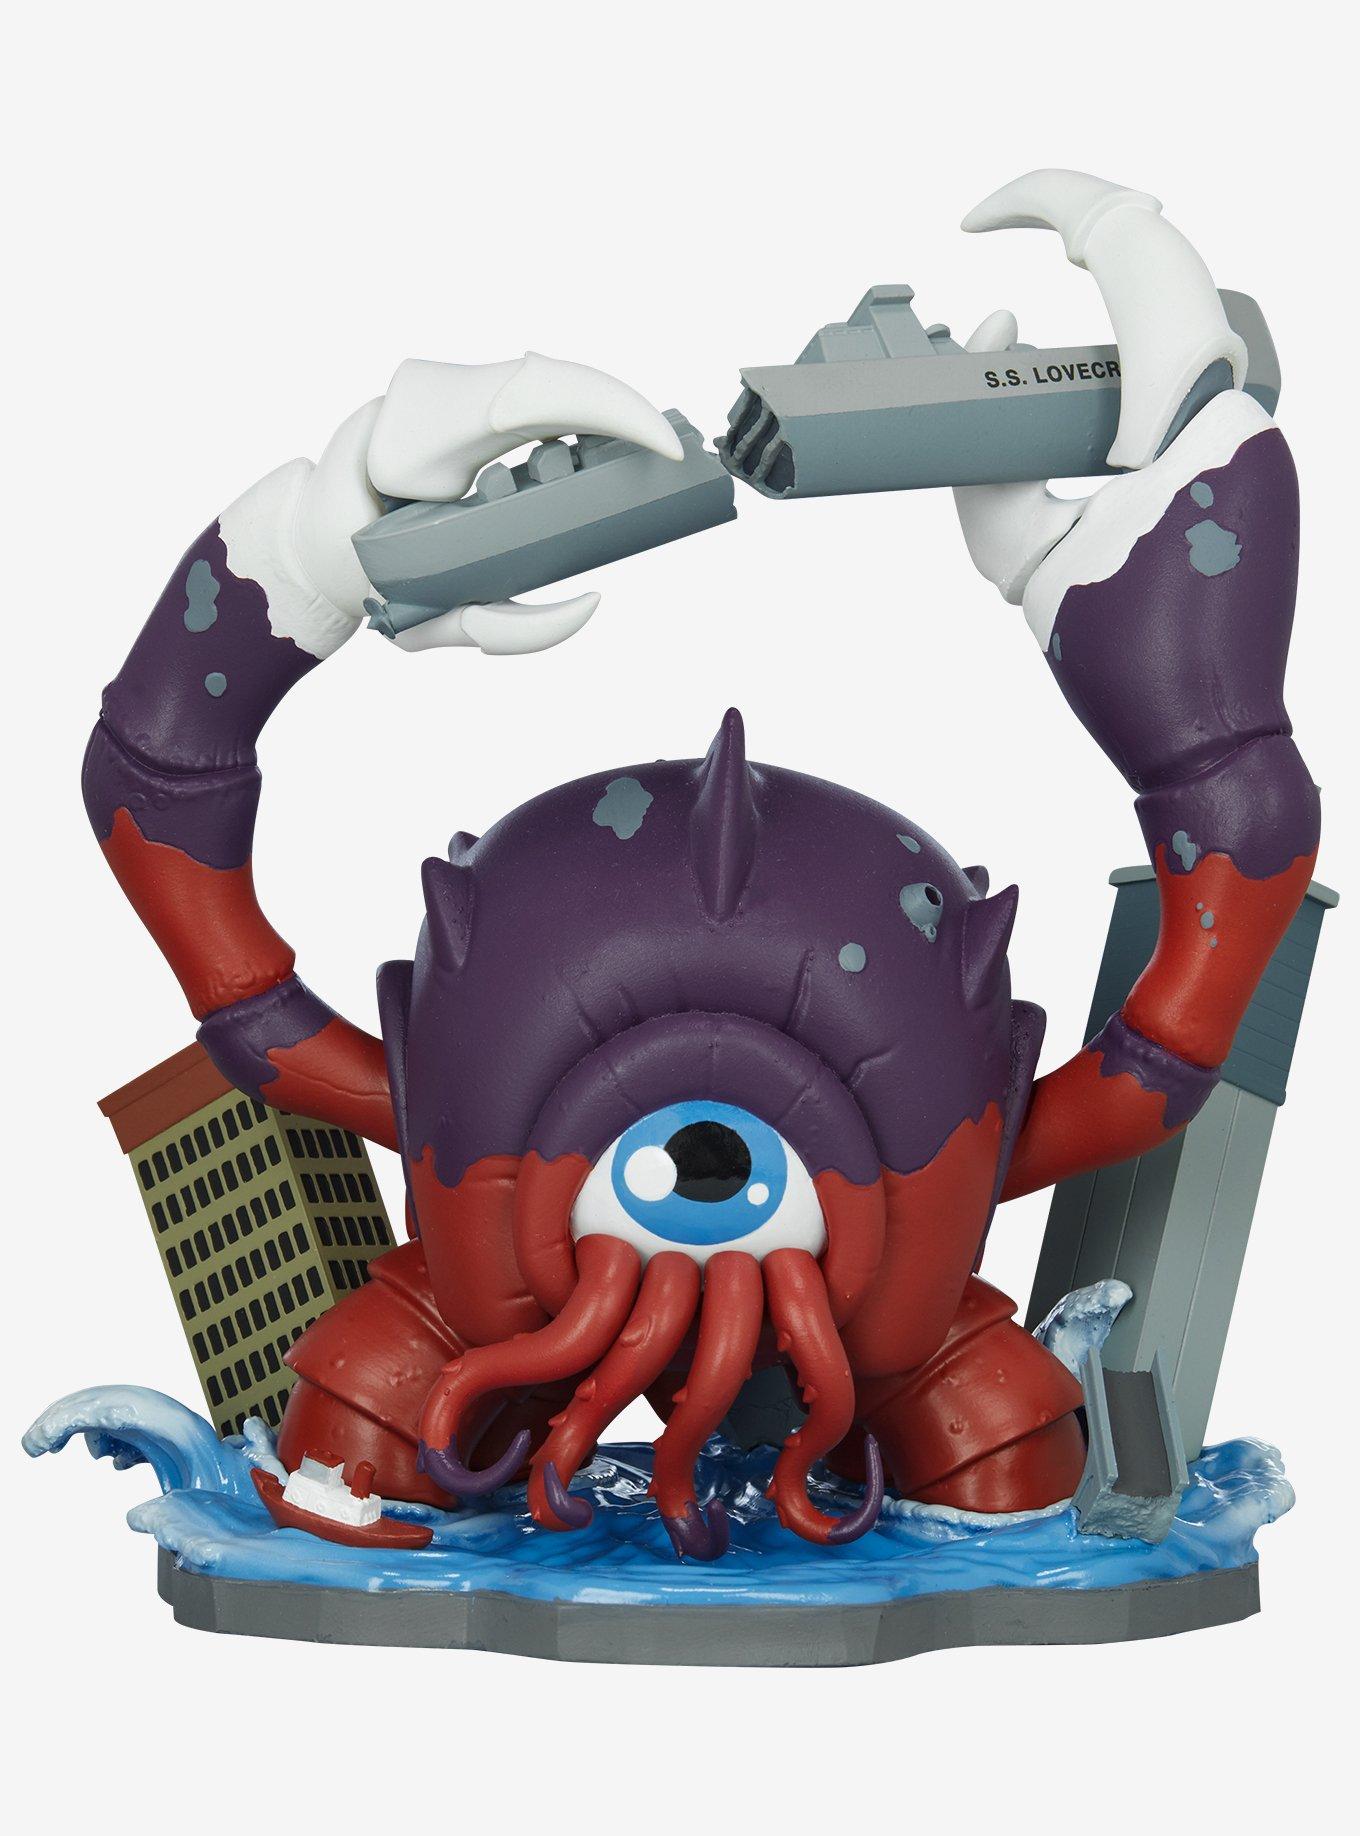 Crabthulu: Terror of the Deep! Designer Collectible Toy by Unruly Industries